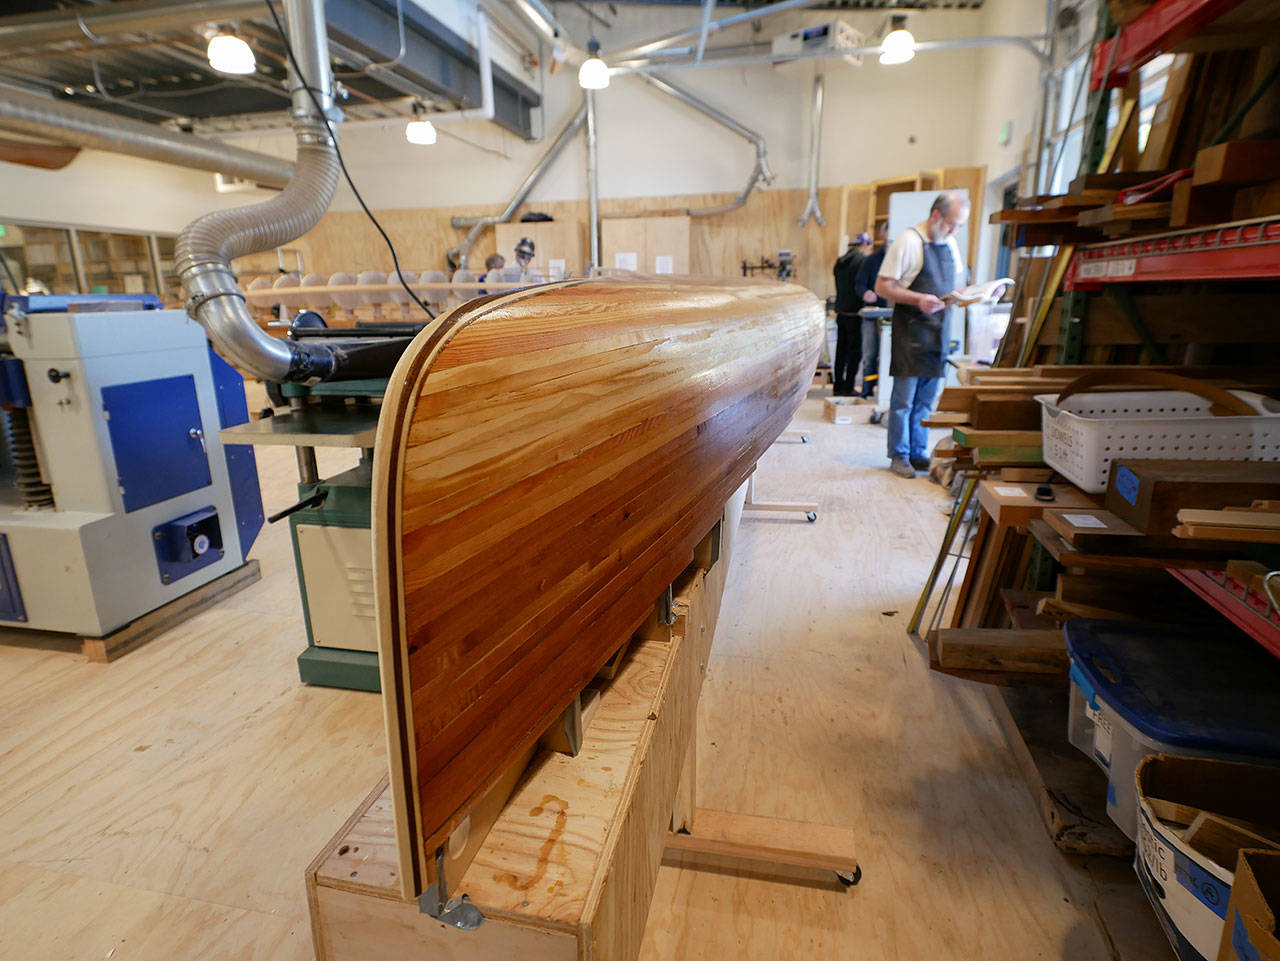 Rick Gordon photo | Jim Gordon’s in-progress prototype canoe, a design which he hopes to export to rural Nicaragua, where his nonprofit recently installed a sawmill to improve the lives of the local residents.